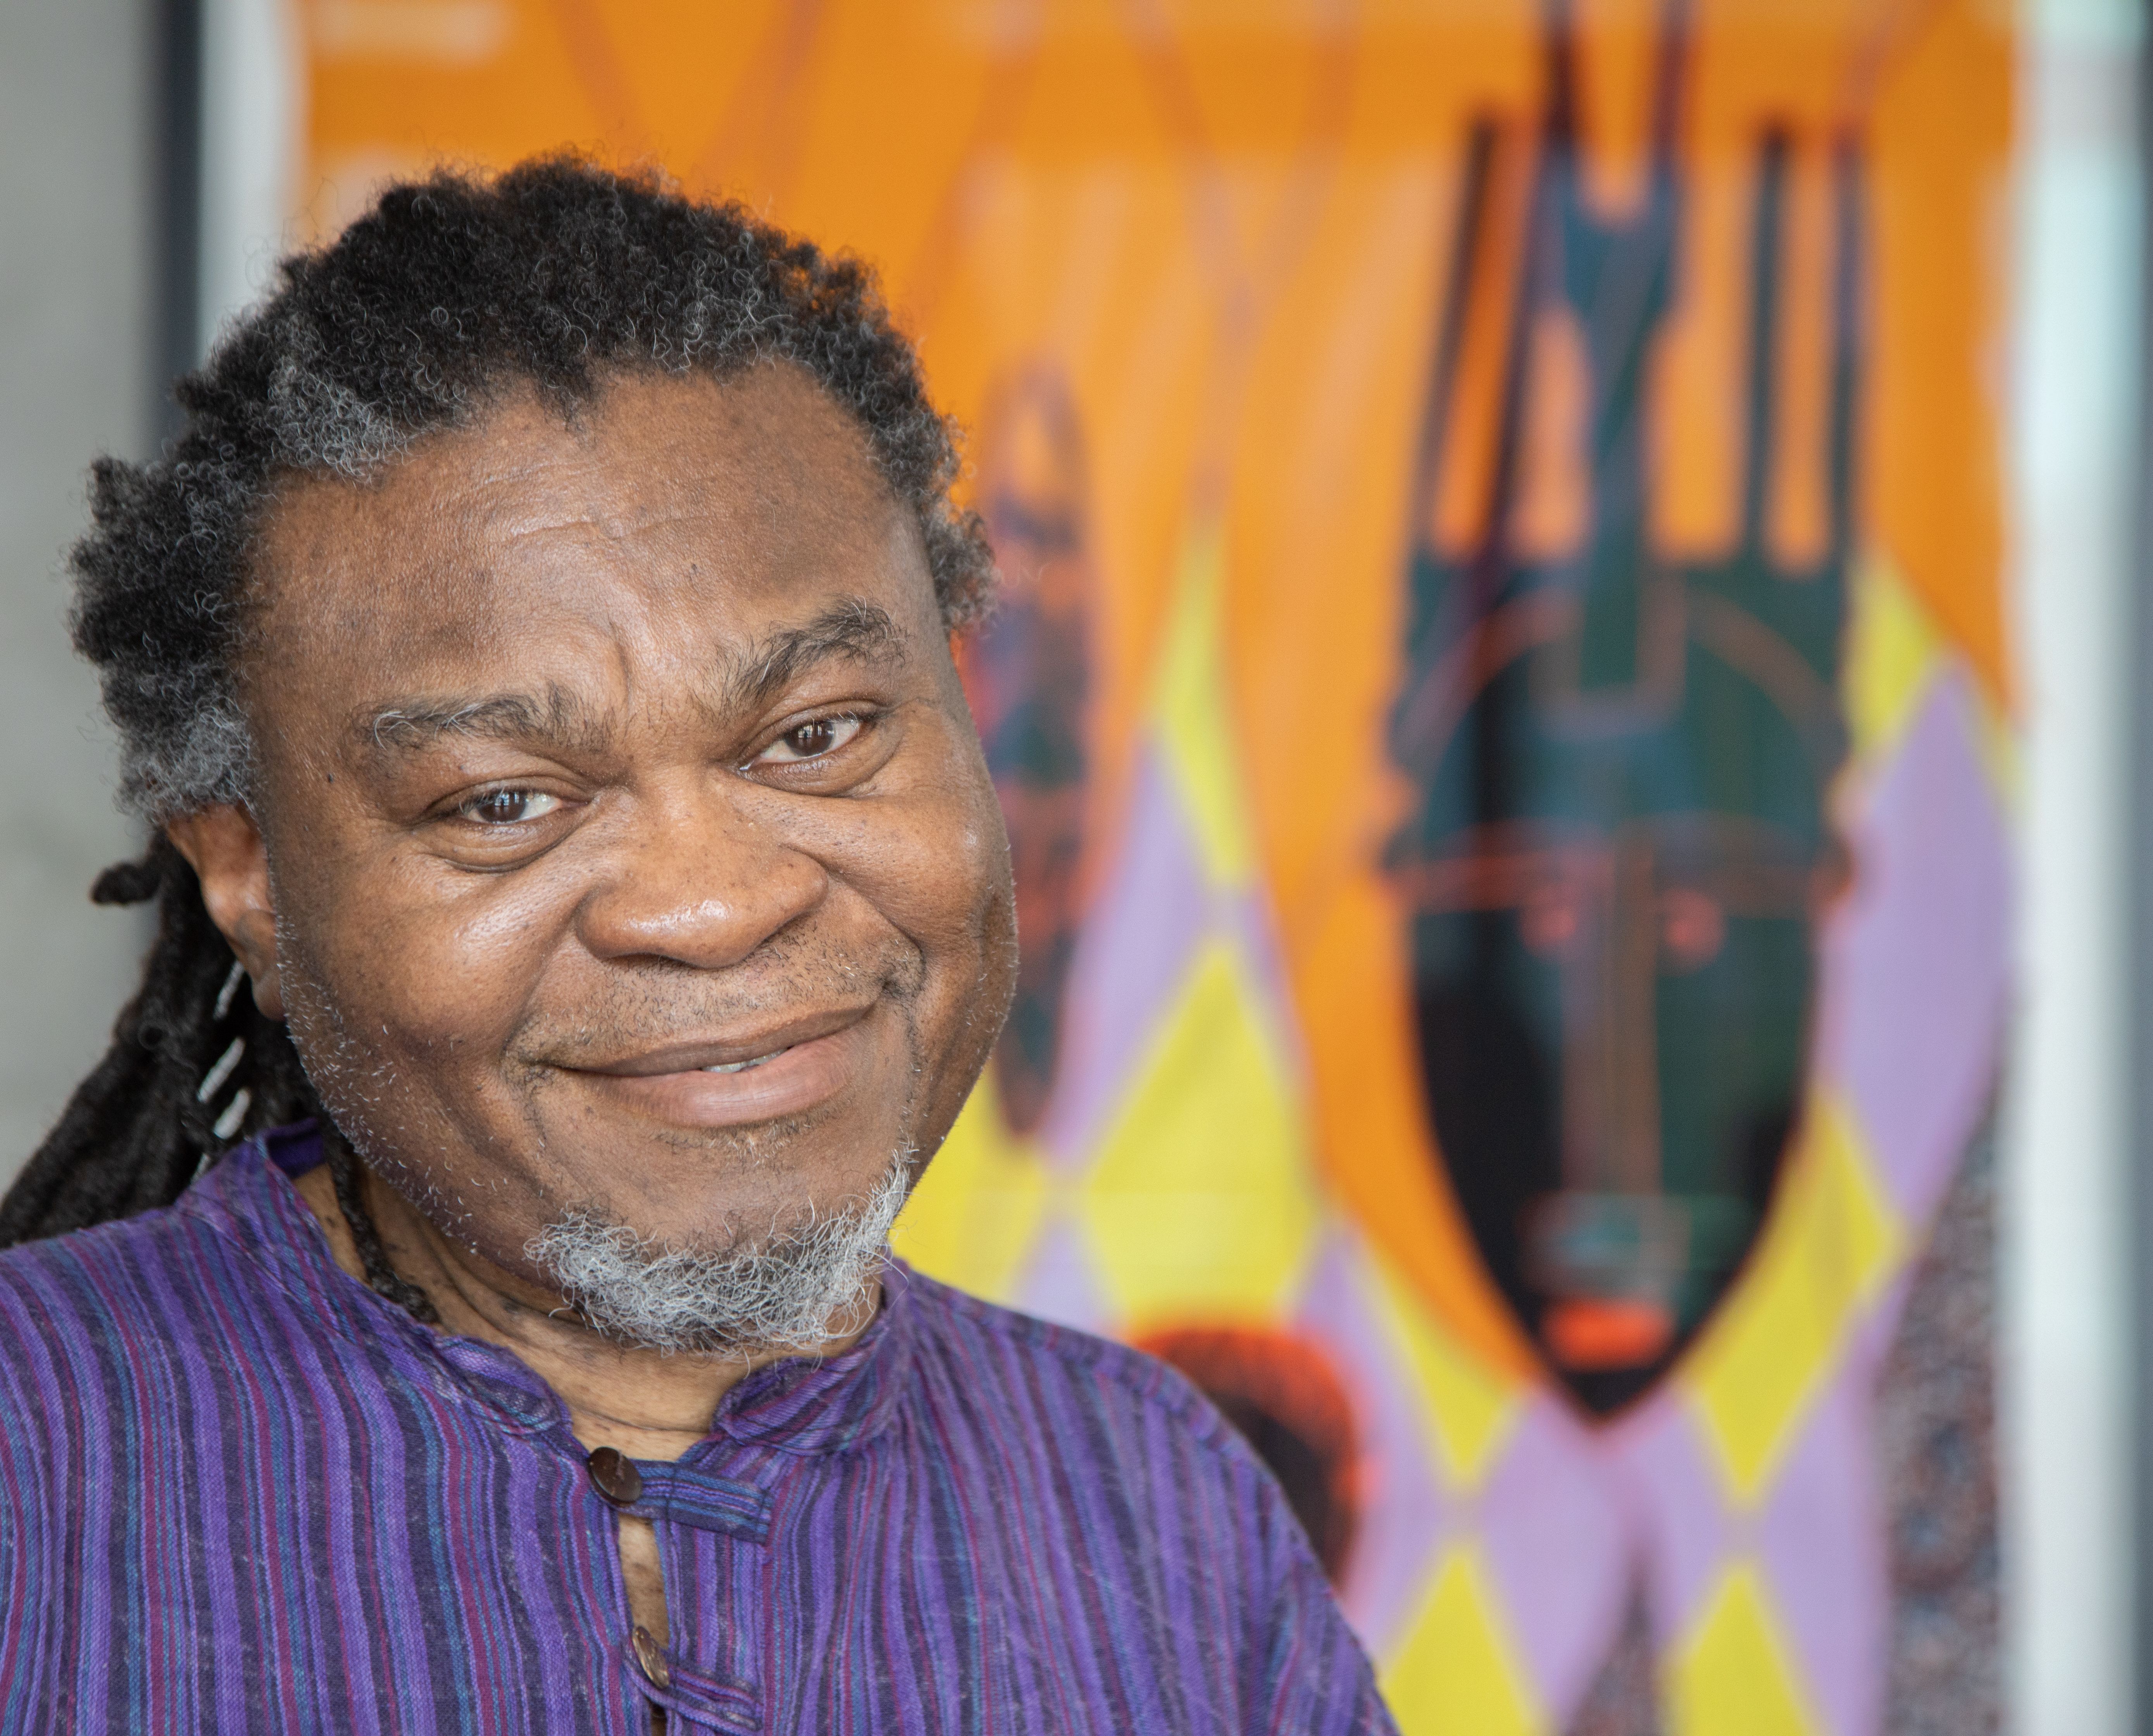 Portrait of Yinka Shonibare CBE RA smiling at the camera. He is wearing a purple shirt and the background is out of focus.